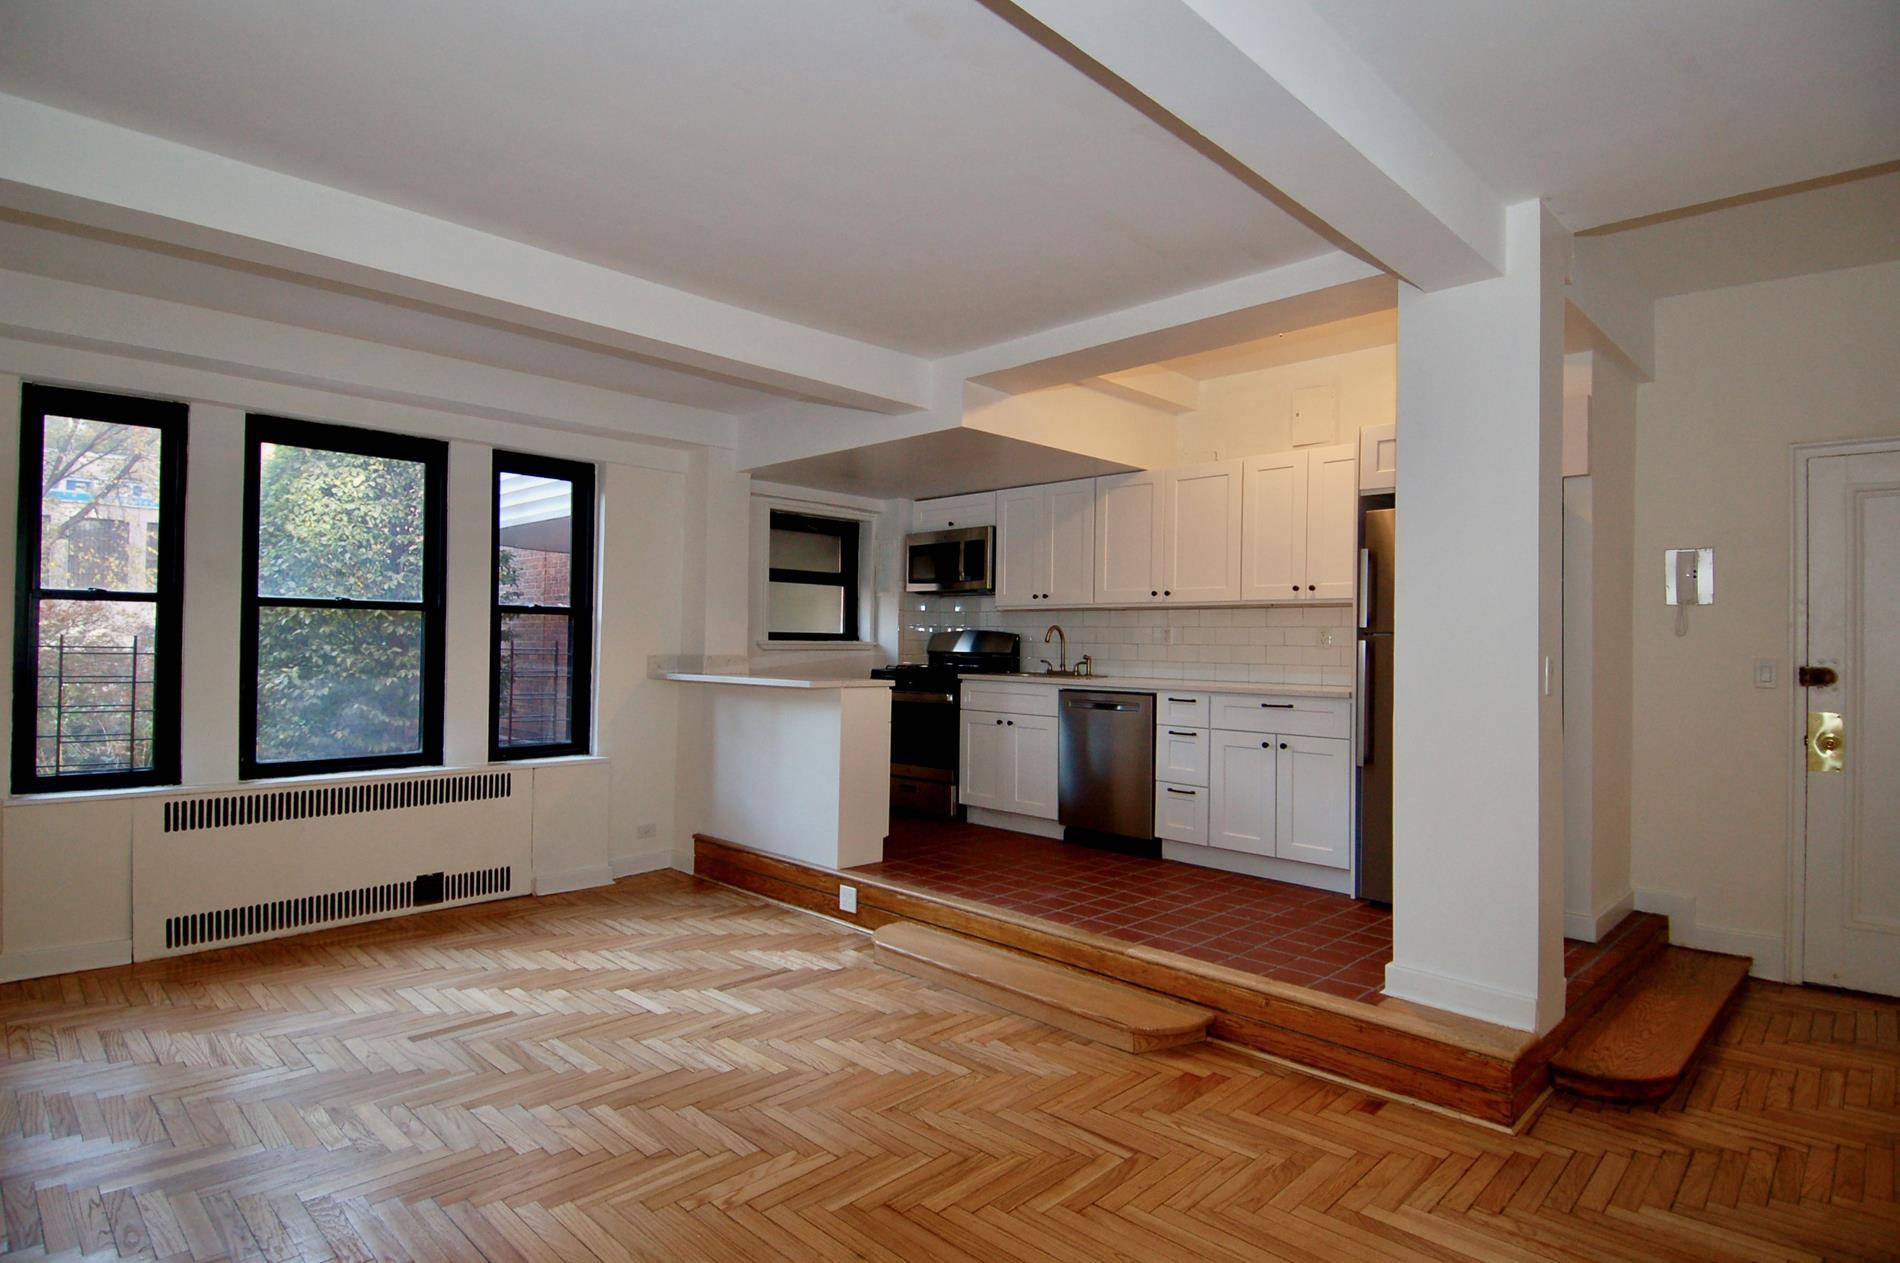 Sweet and Sunny 1BR in Park Terrace Gardens Newly RenovatedThis one bedroom in Inwood s most sought after cooperative has a lovely layout with a newly renovated open kitchen overlooking ...